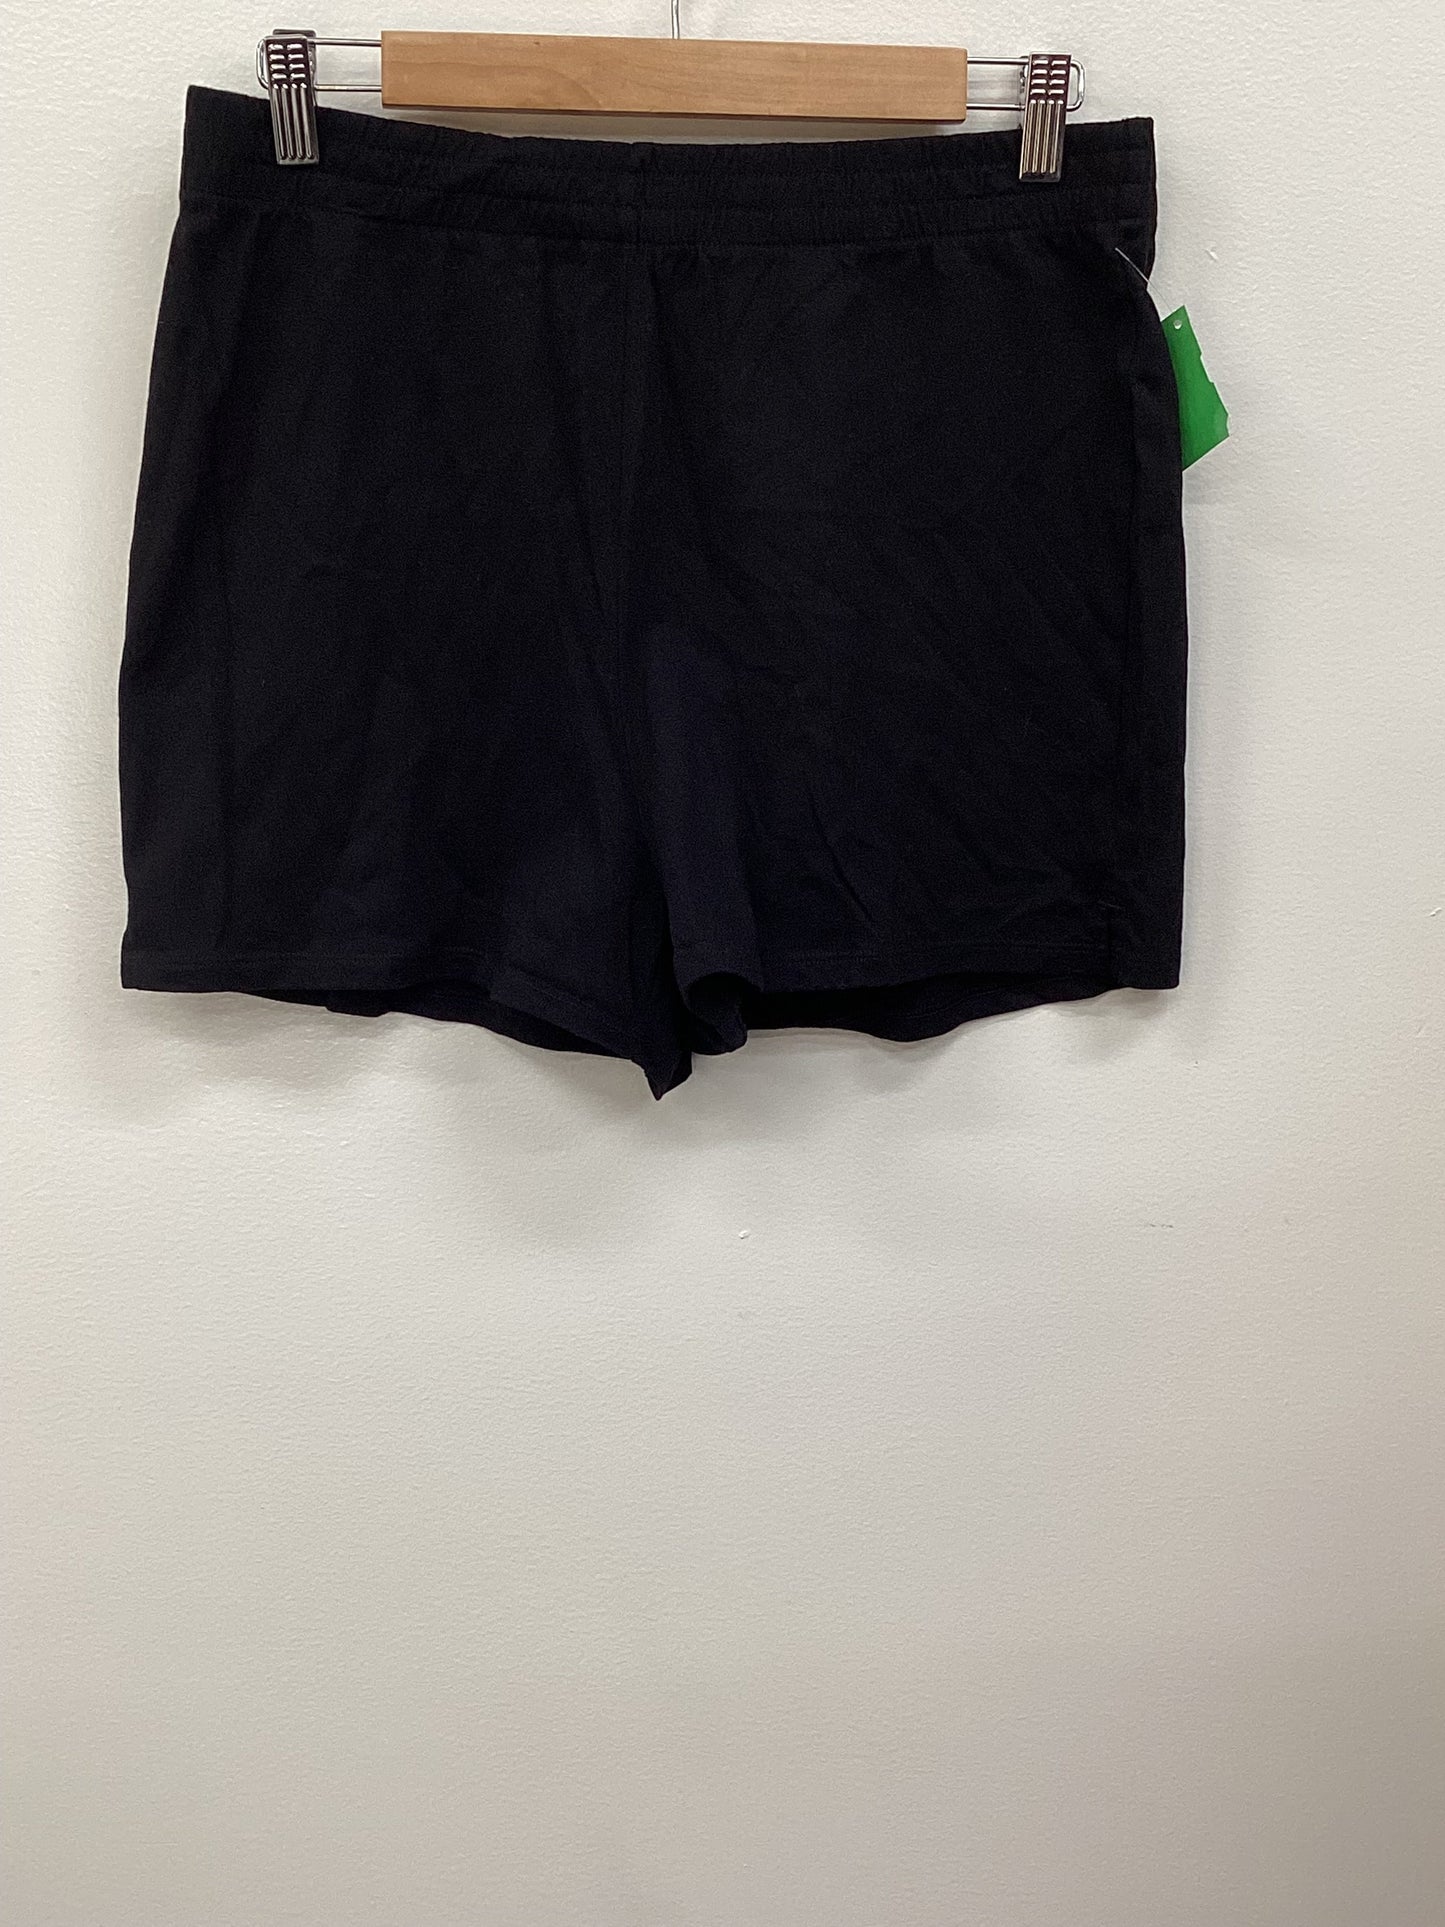 Shorts By Wilfred  Size: M